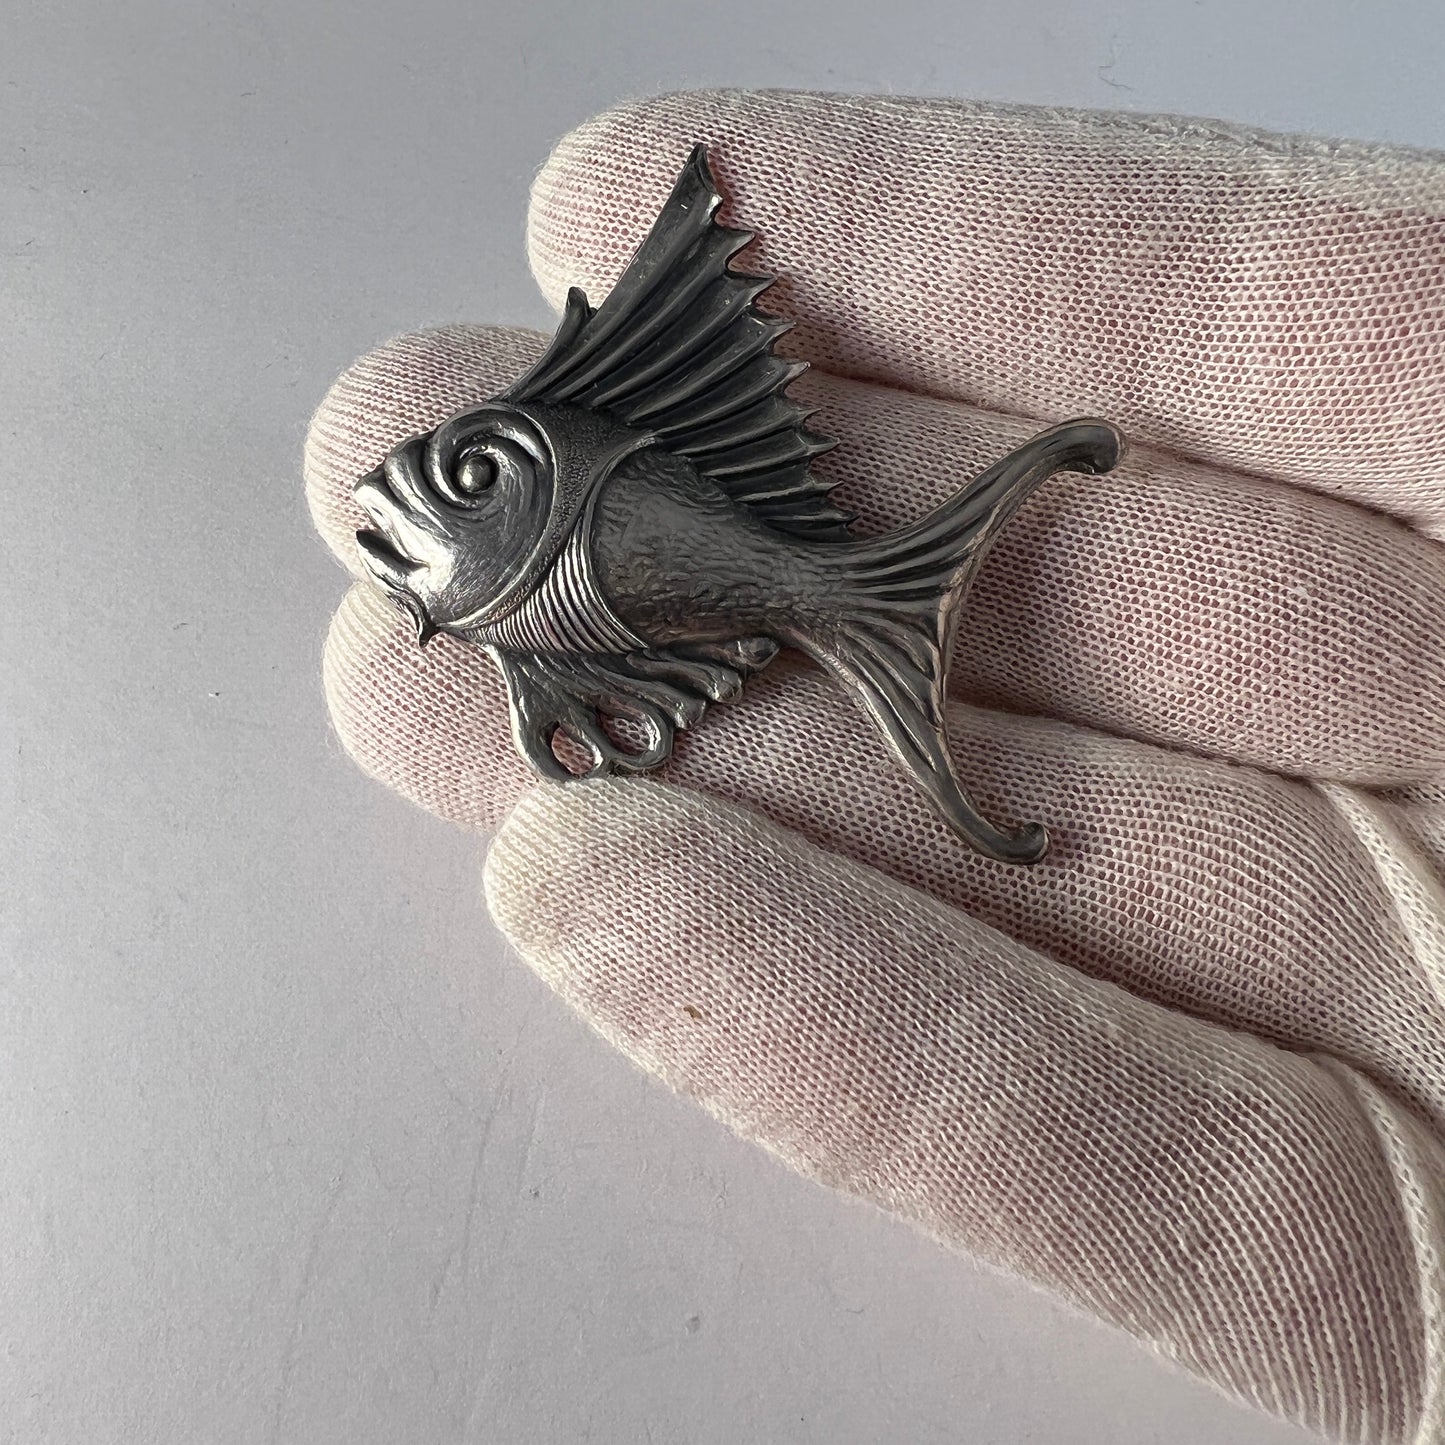 Olausson, Sweden 1948. Vintage Stetrling Silver Fish Brooch.